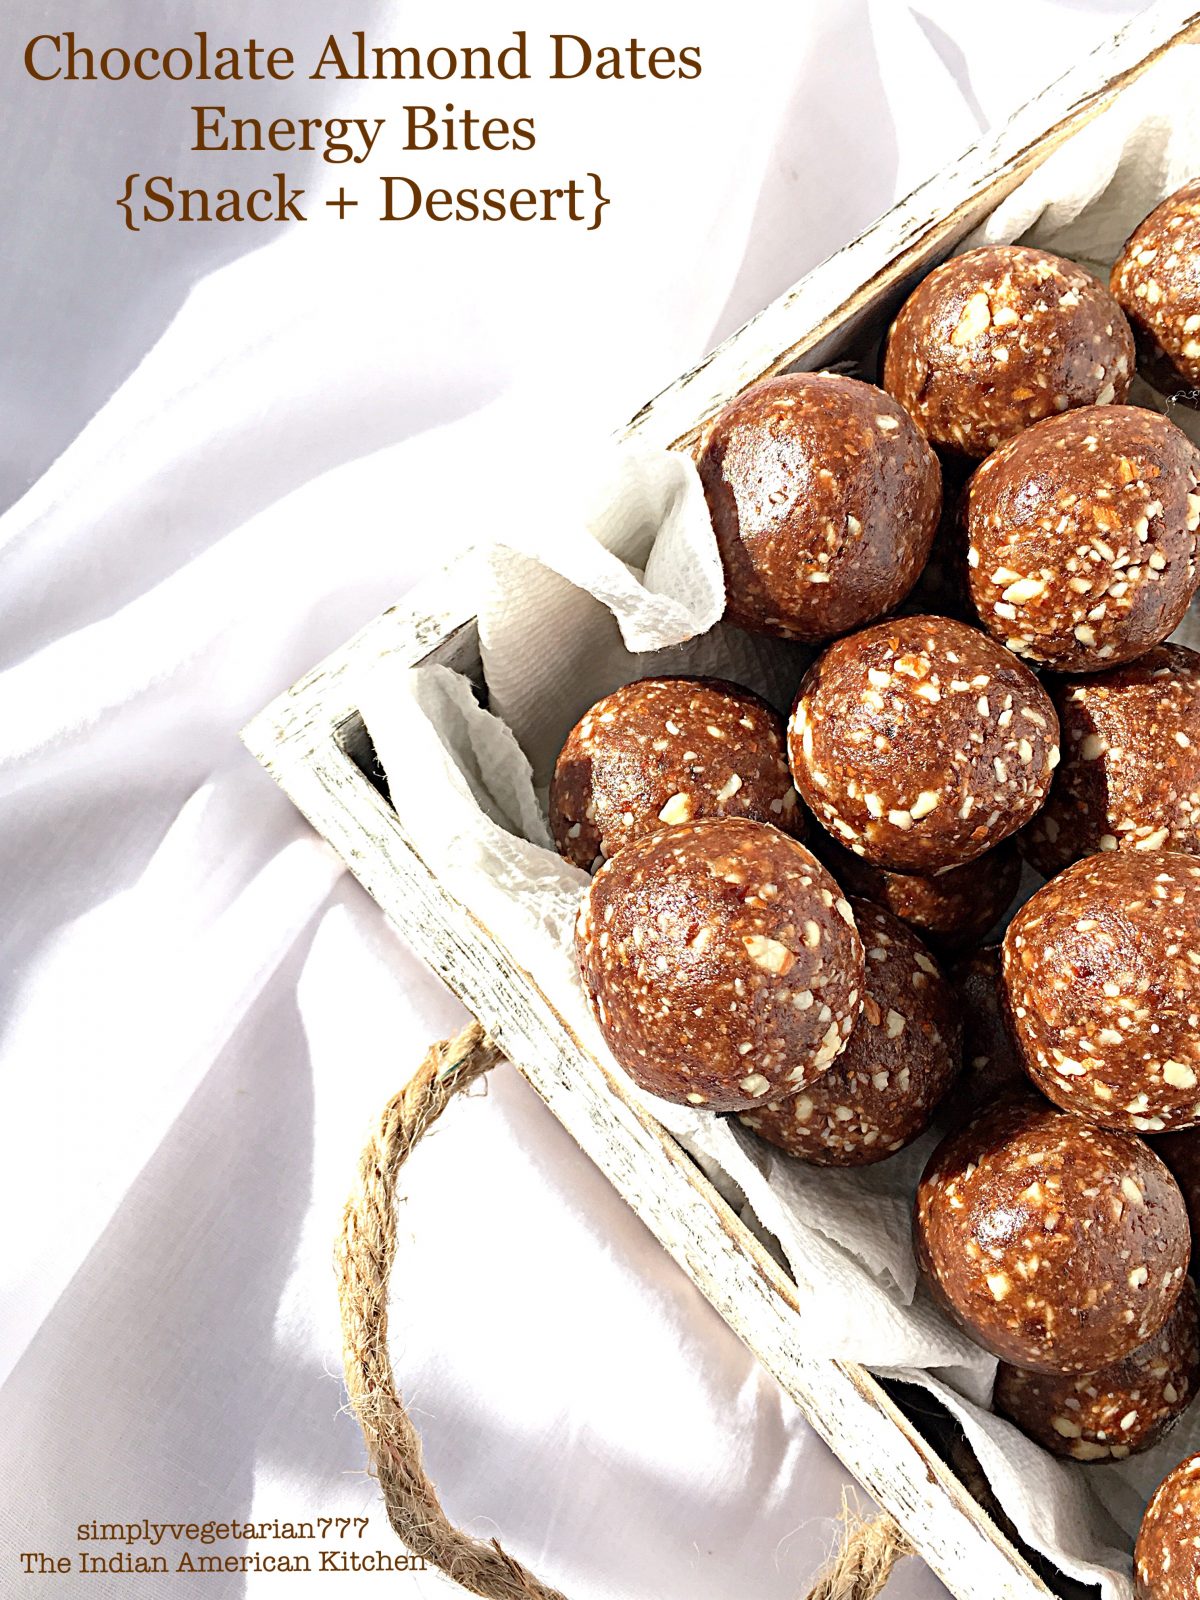 Chocolate Almond Dates Energy Bites are NO BAKE and EASY + QUICK to put together, in literally UNDER 5 MINUTES. Delicious Fudge like Balls make for perfect One Bite Snack on the go and are even great as a Guilt-Free Dessert. The best part is that these are Vegan + Gluten-free too. #vegansnack #glutenfreesnack #energybites #energyballs #nobakedessert #easydessert #chocolateenergybites #almondbites #datesenergybites #quicksnack